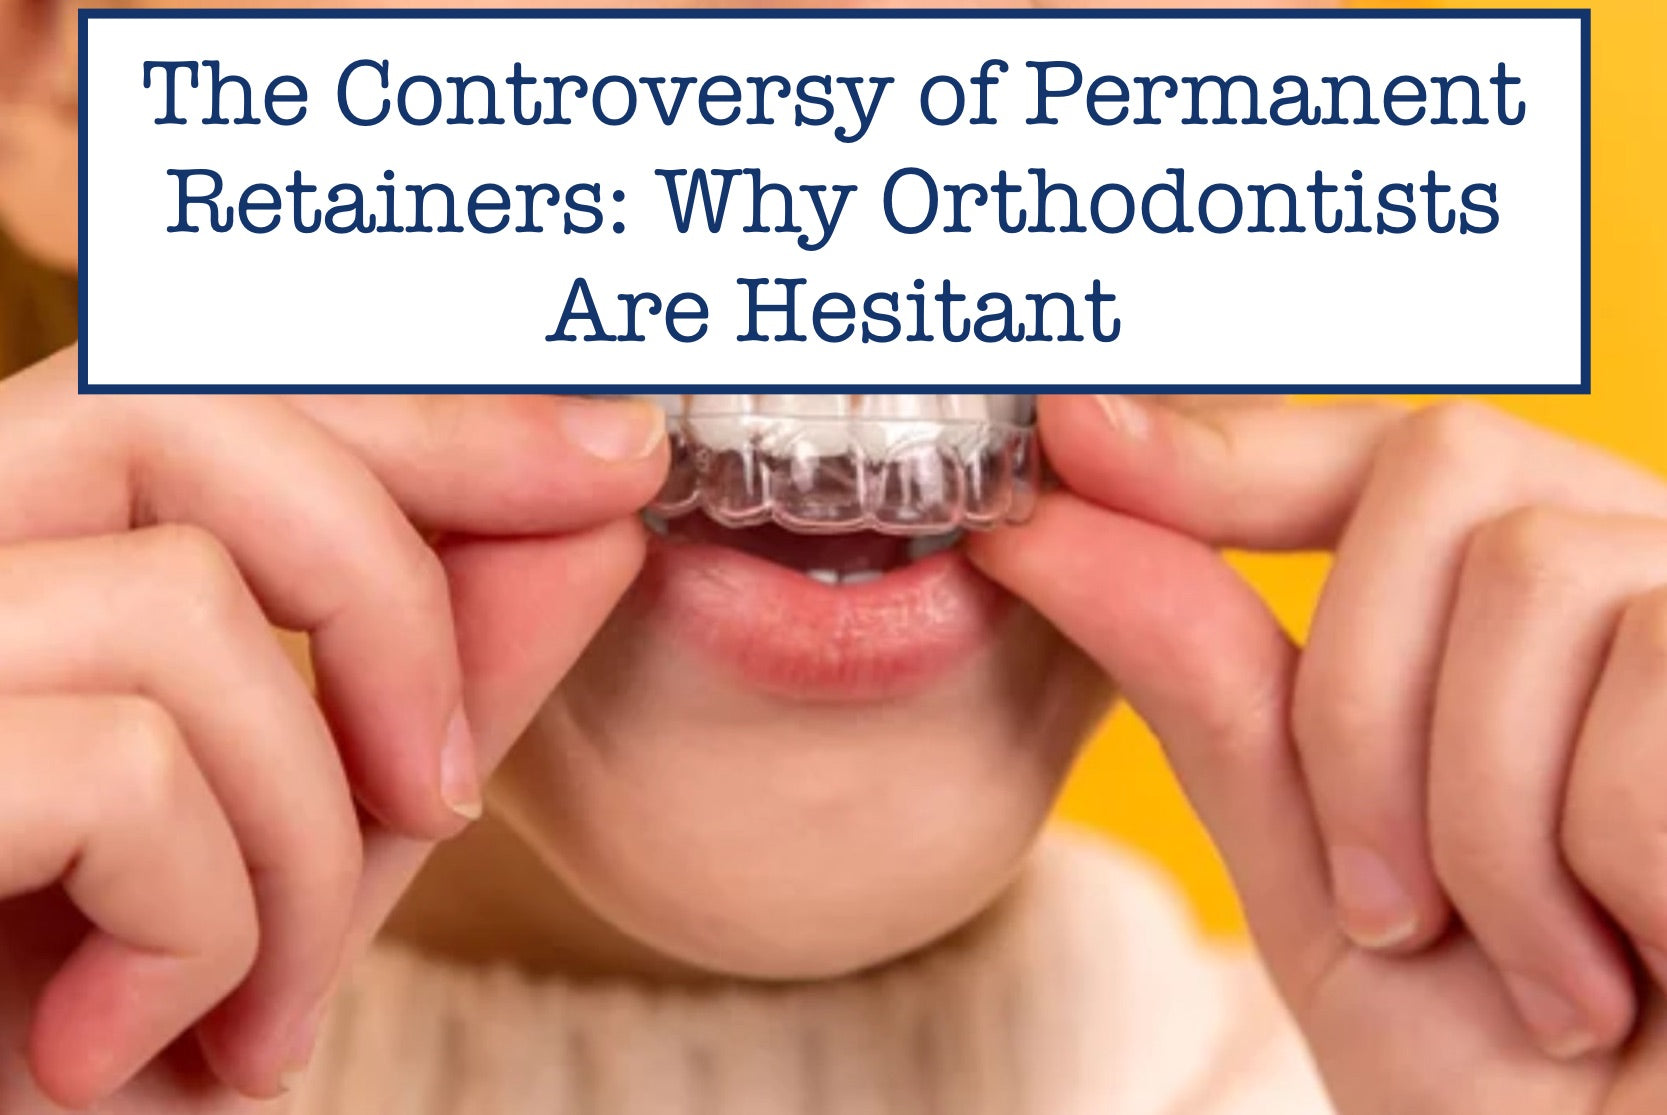 The Controversy of Permanent Retainers: Why Orthodontists Are Hesitant